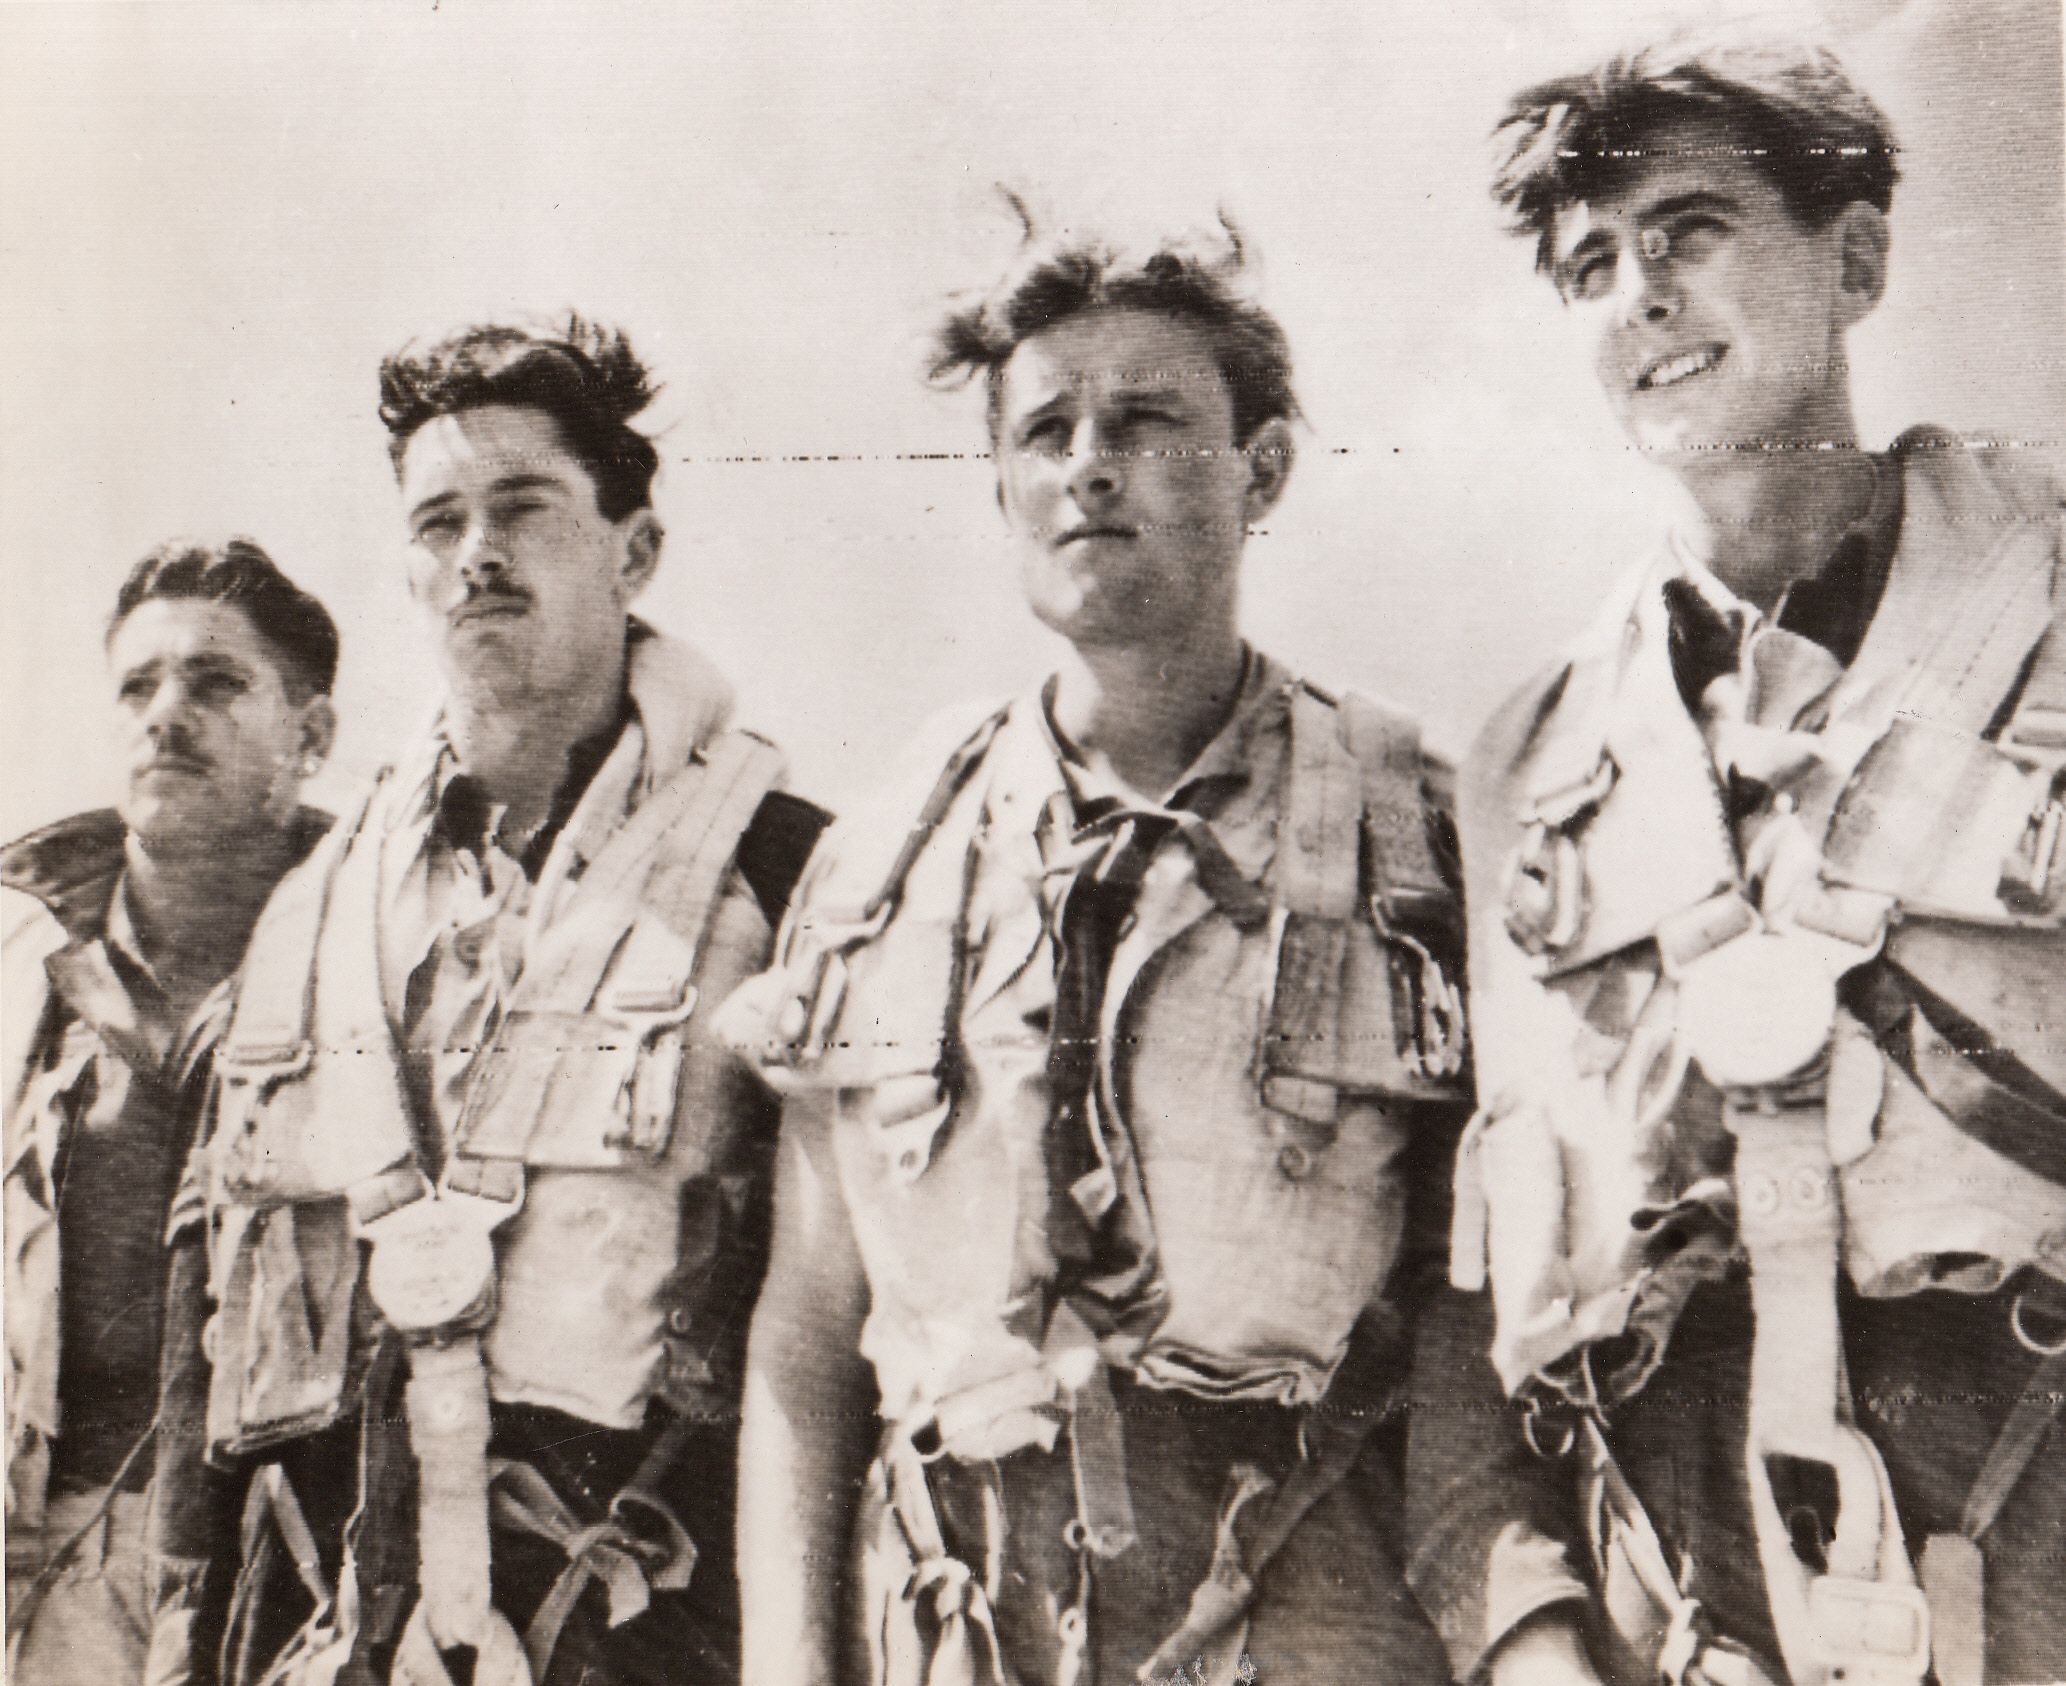 Flew Supplies to Warsaw Patriots, 8/23/1944. ITALY – Back at their base in Italy are these four members of an RAF Liberator crew who recently flew from Italy to Warsaw and back to drop supplies to patriots battling the Nazis in the Polish capitol. They are (left to right): F/S Kenneth Pearce, Sgt. Peter Green, Sgt. Derek Coates, and Sgt. John Rush.;